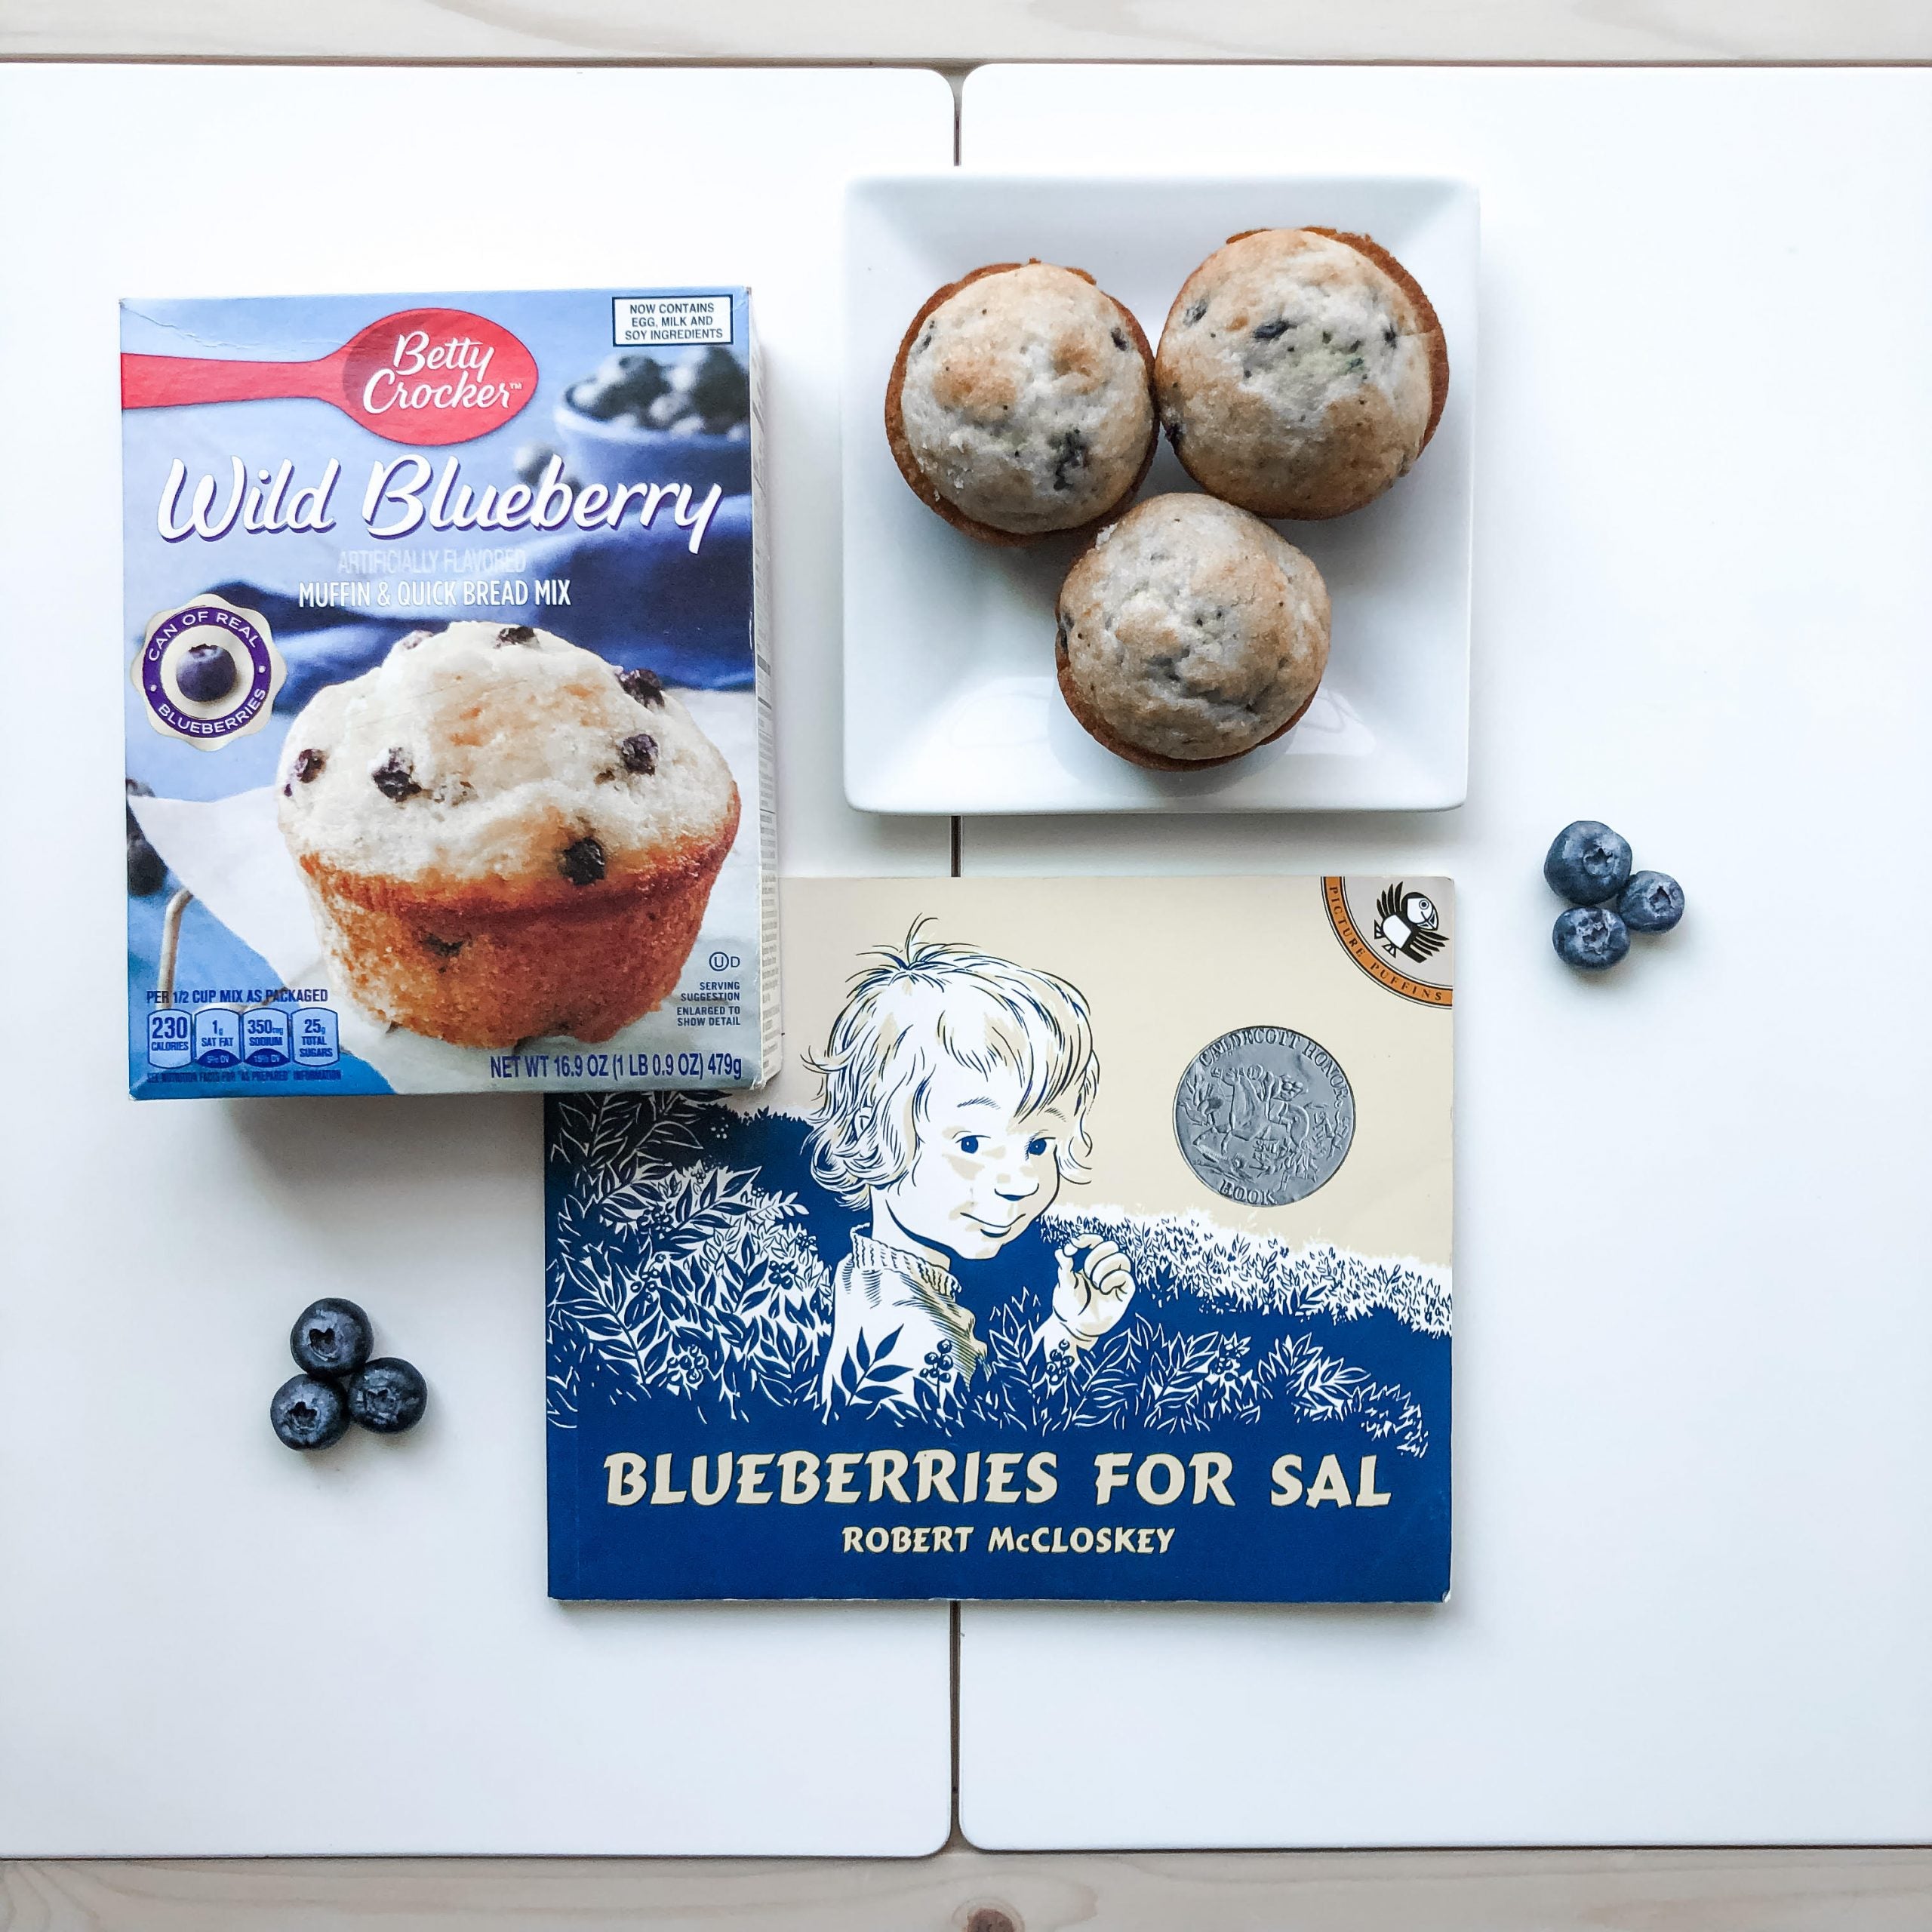 blueberry muffins, blueberry muffin mix, and the book blueberries for sal to show how baking is a form of bookish play